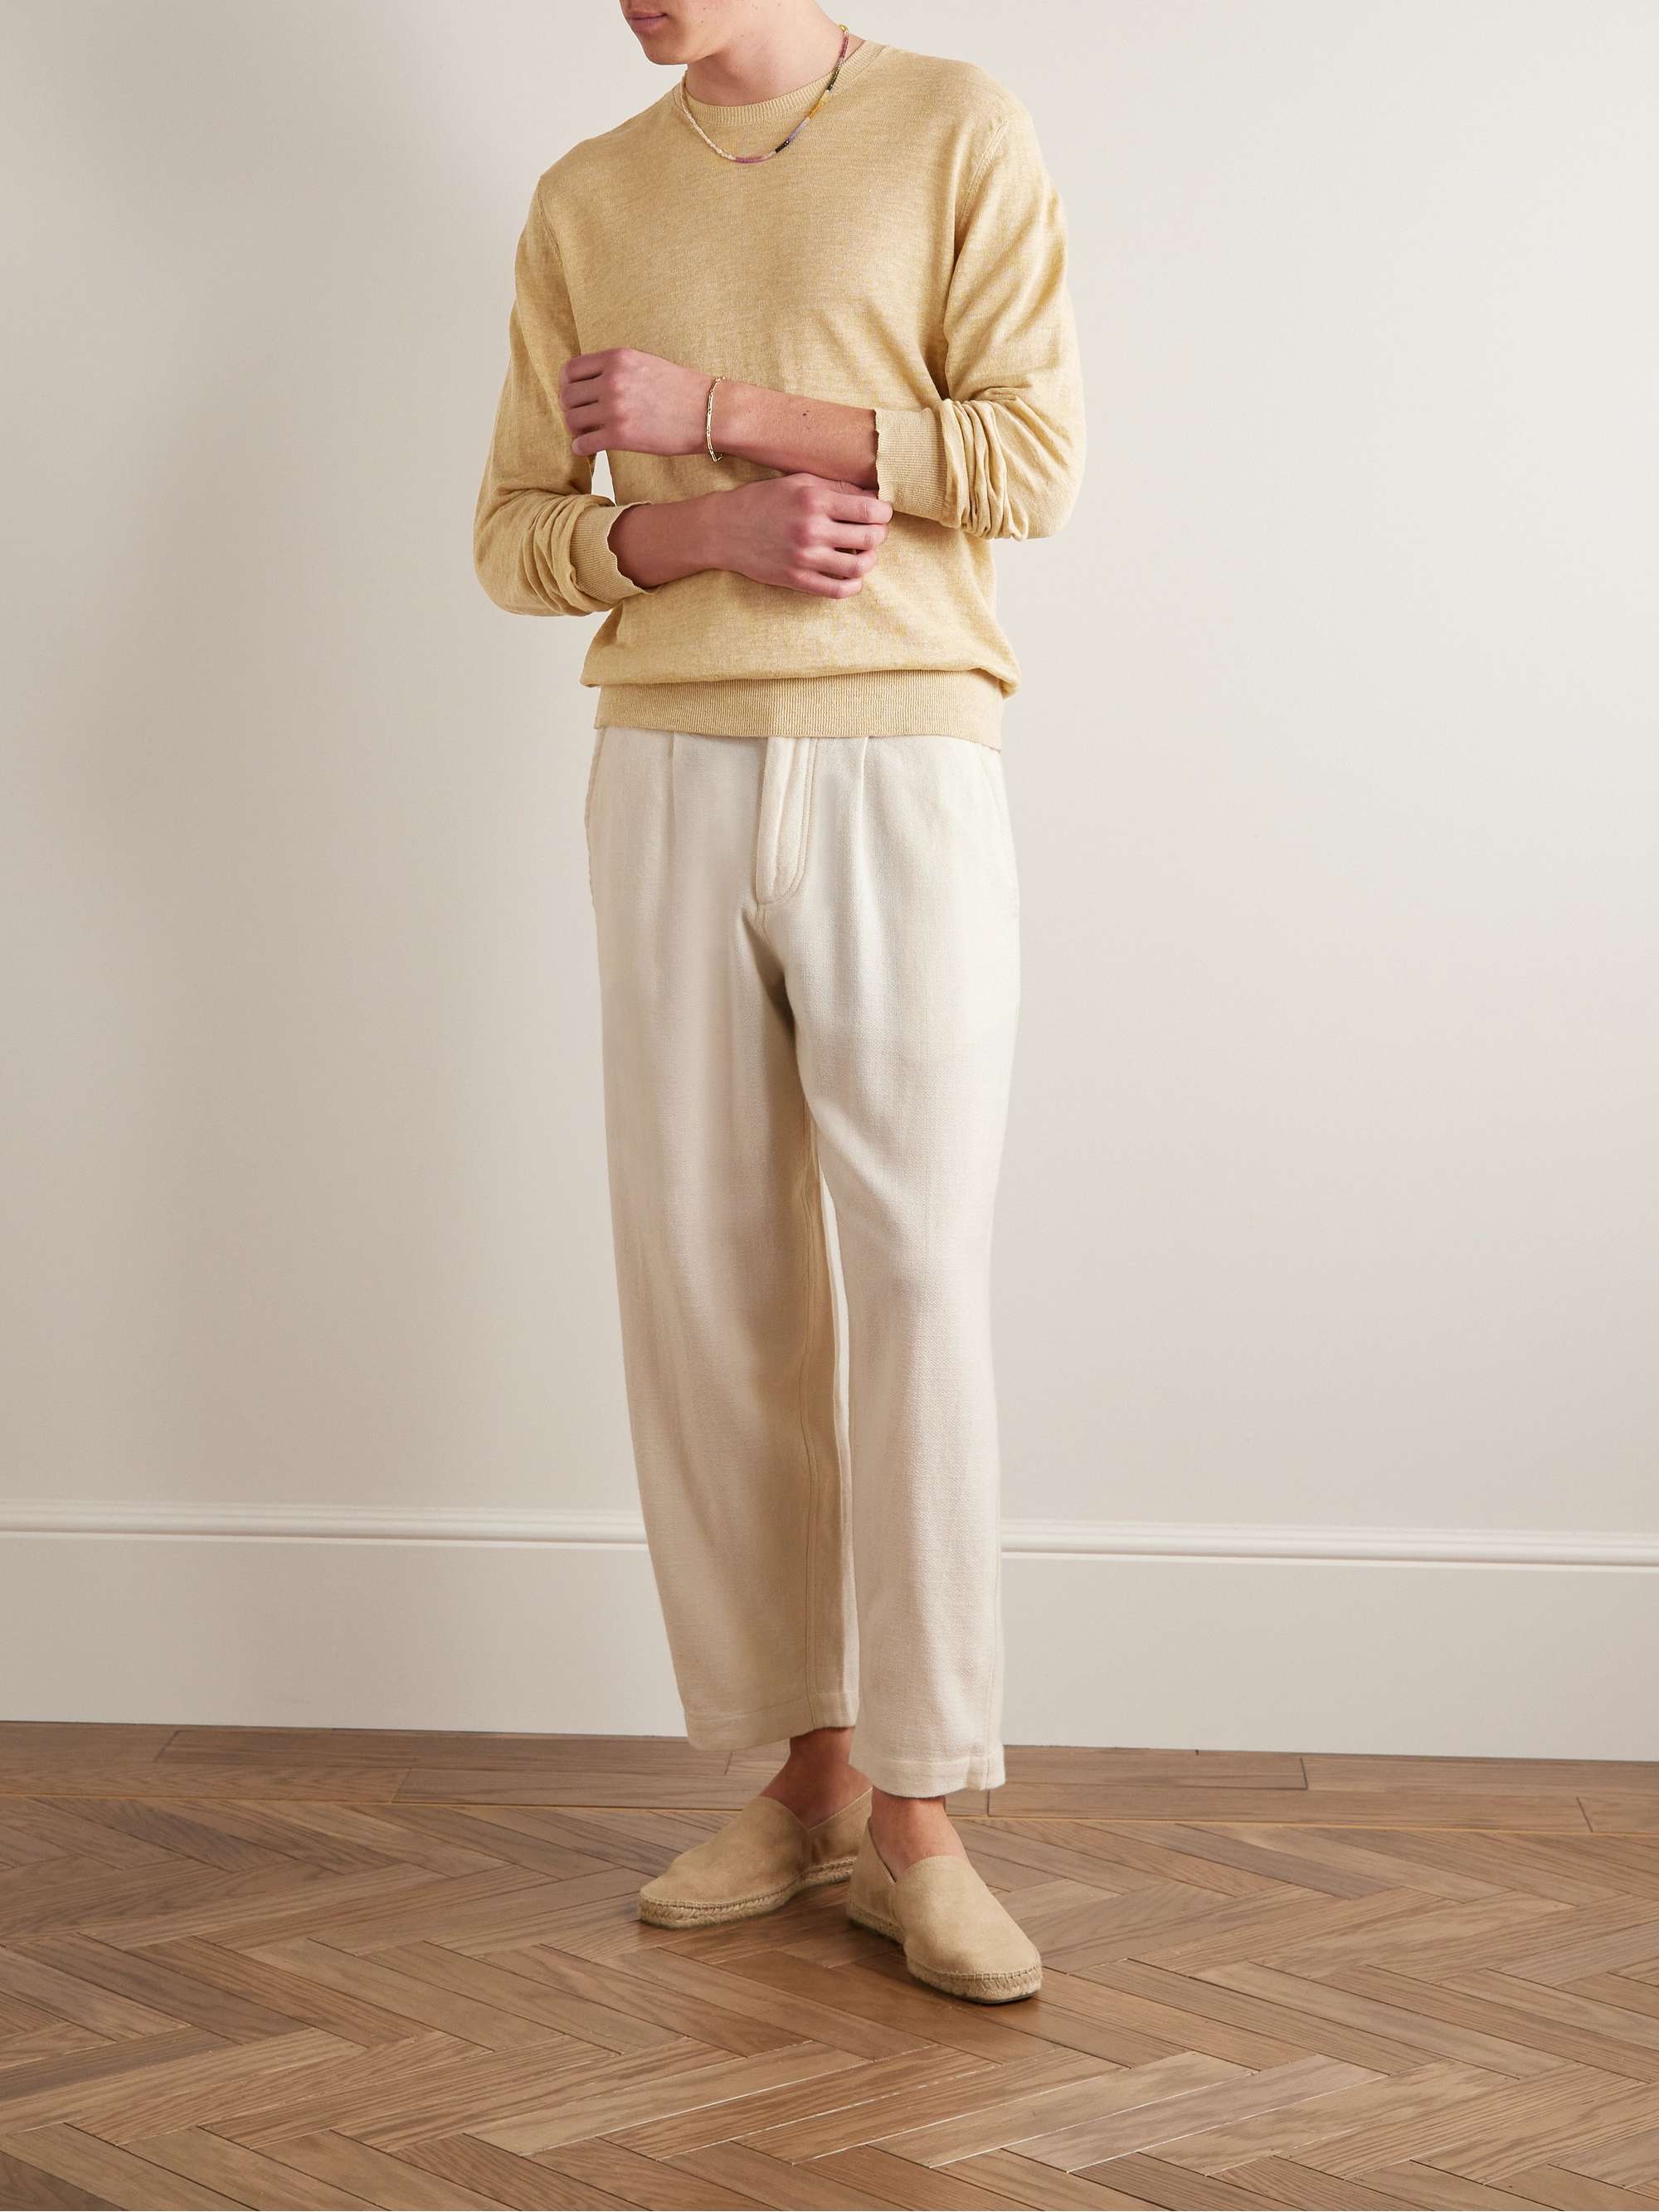 HARTFORD Linen and Cotton-Blend Sweater